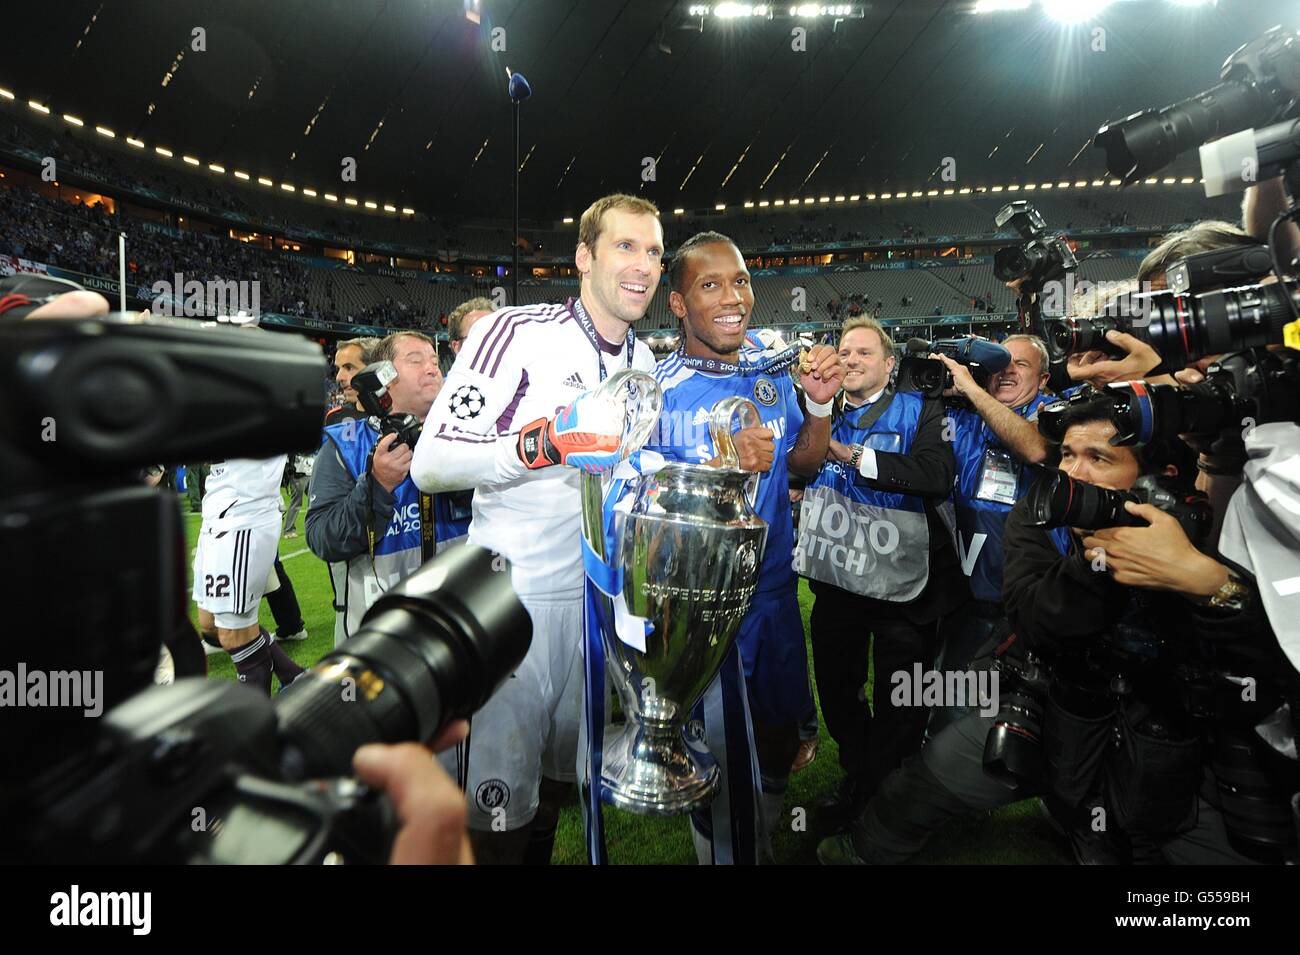 Chelsea's Didier Drogba and Petr Cech (left) celebrate winning the UEFA Champions League, after the final whistle Stock Photo